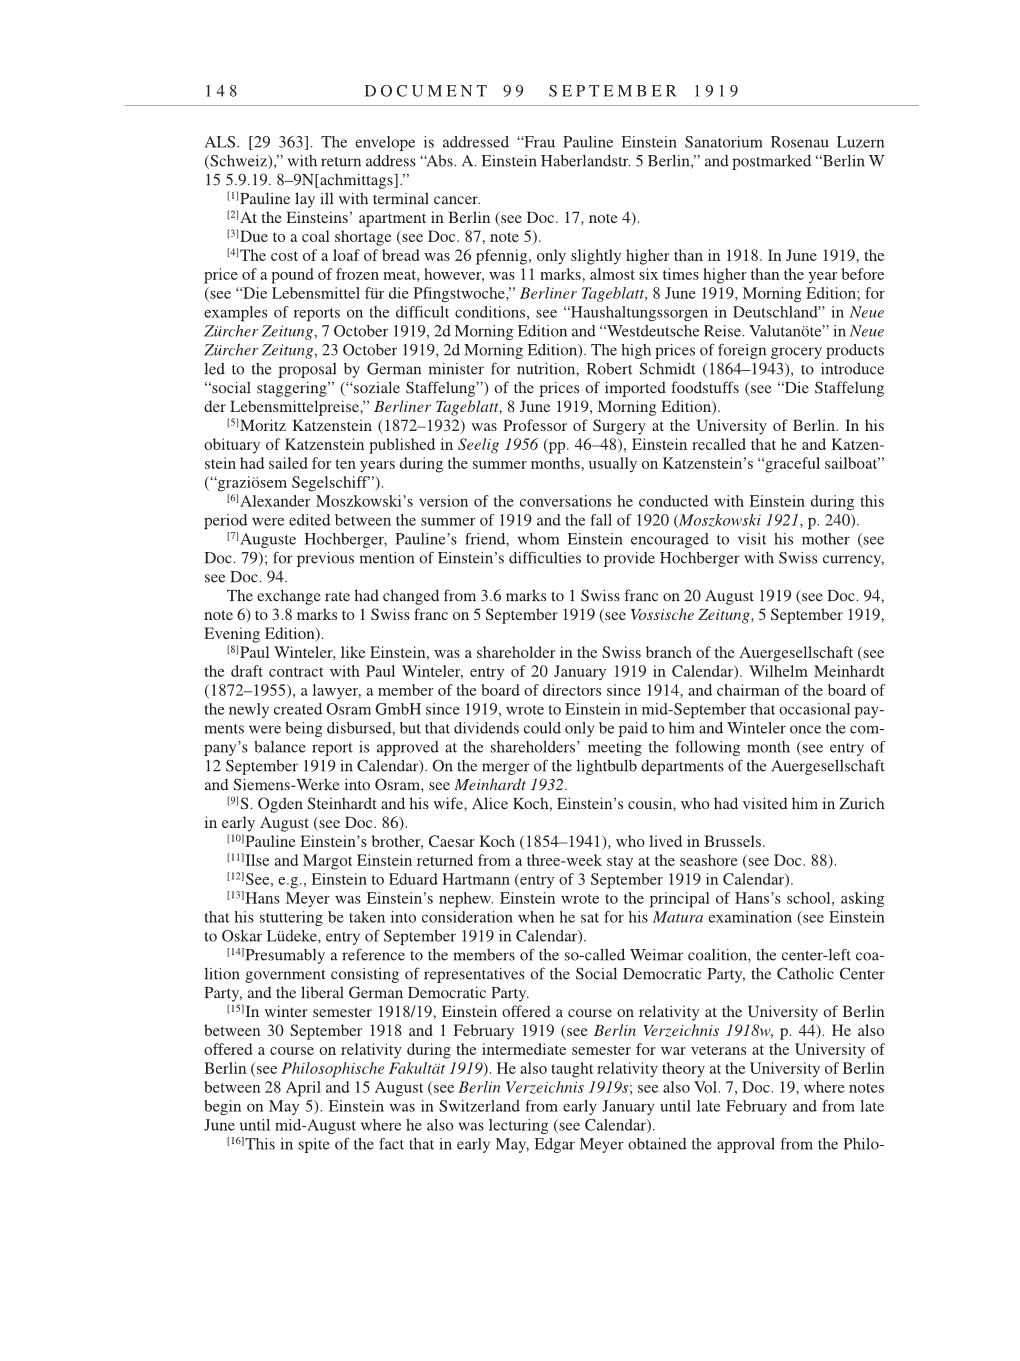 Volume 9: The Berlin Years: Correspondence January 1919-April 1920 page 148